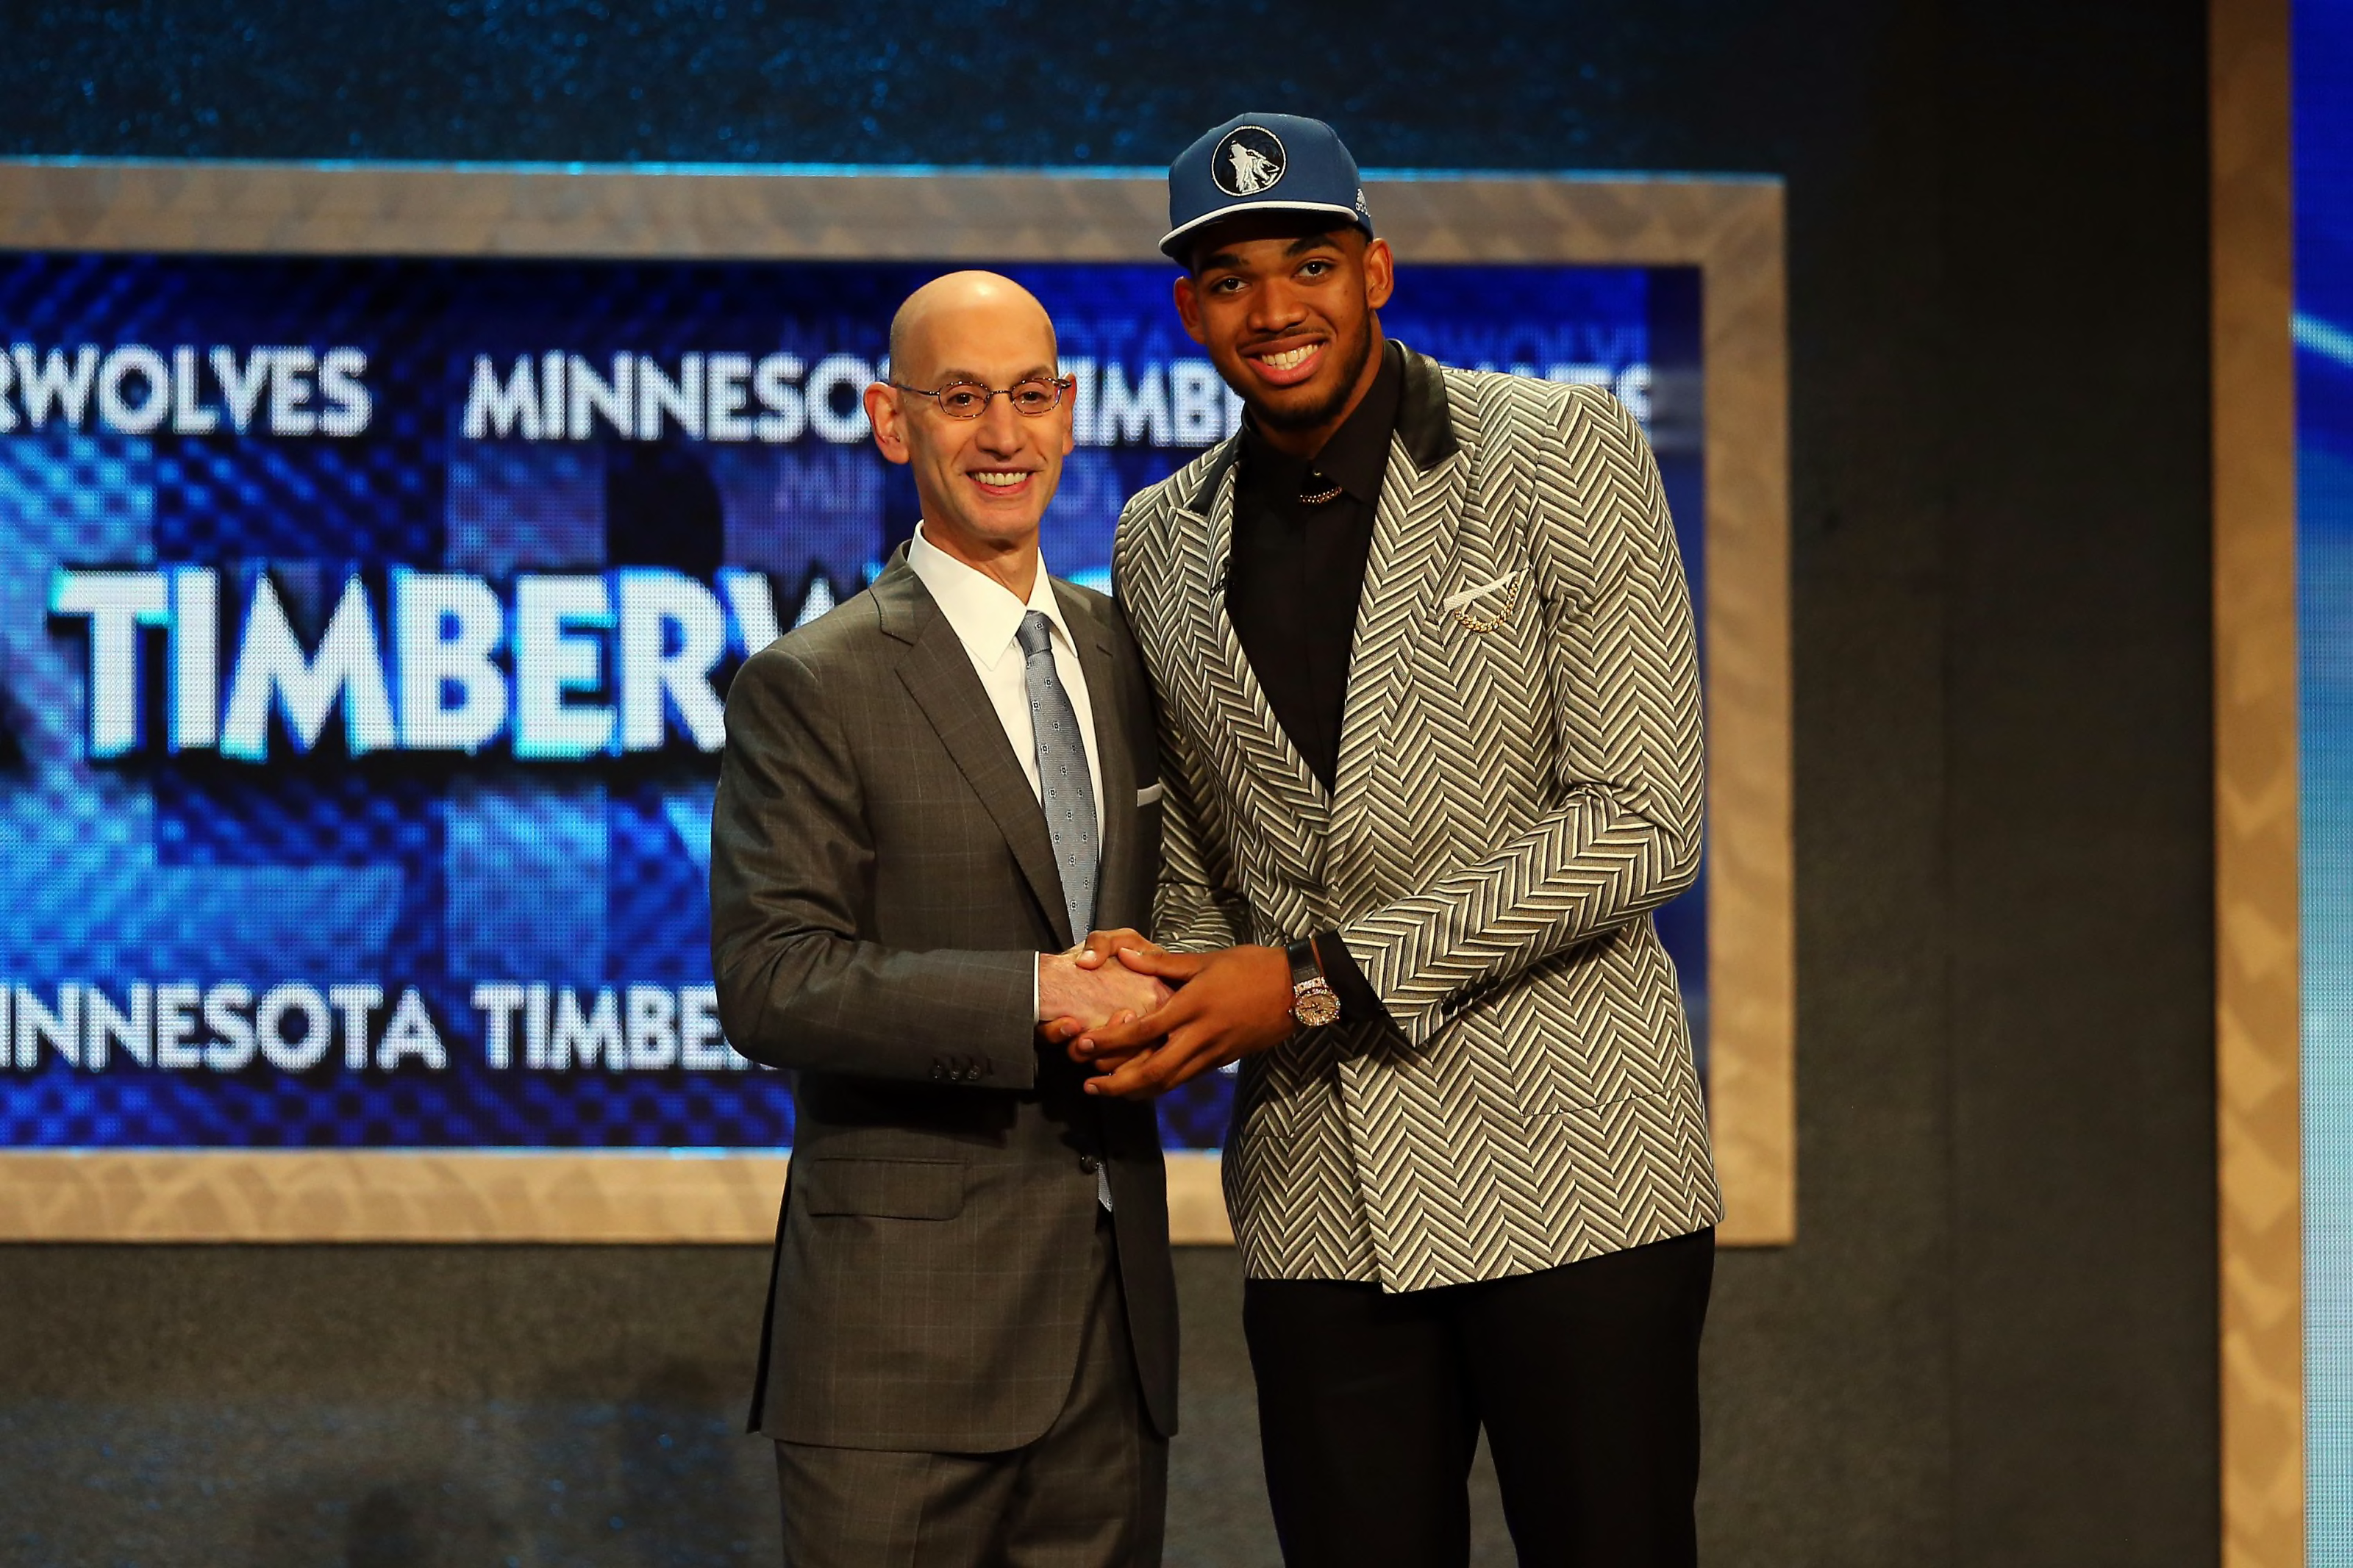 Minnesota Timberwolves History of the No. 1 pick in the NBA Draft